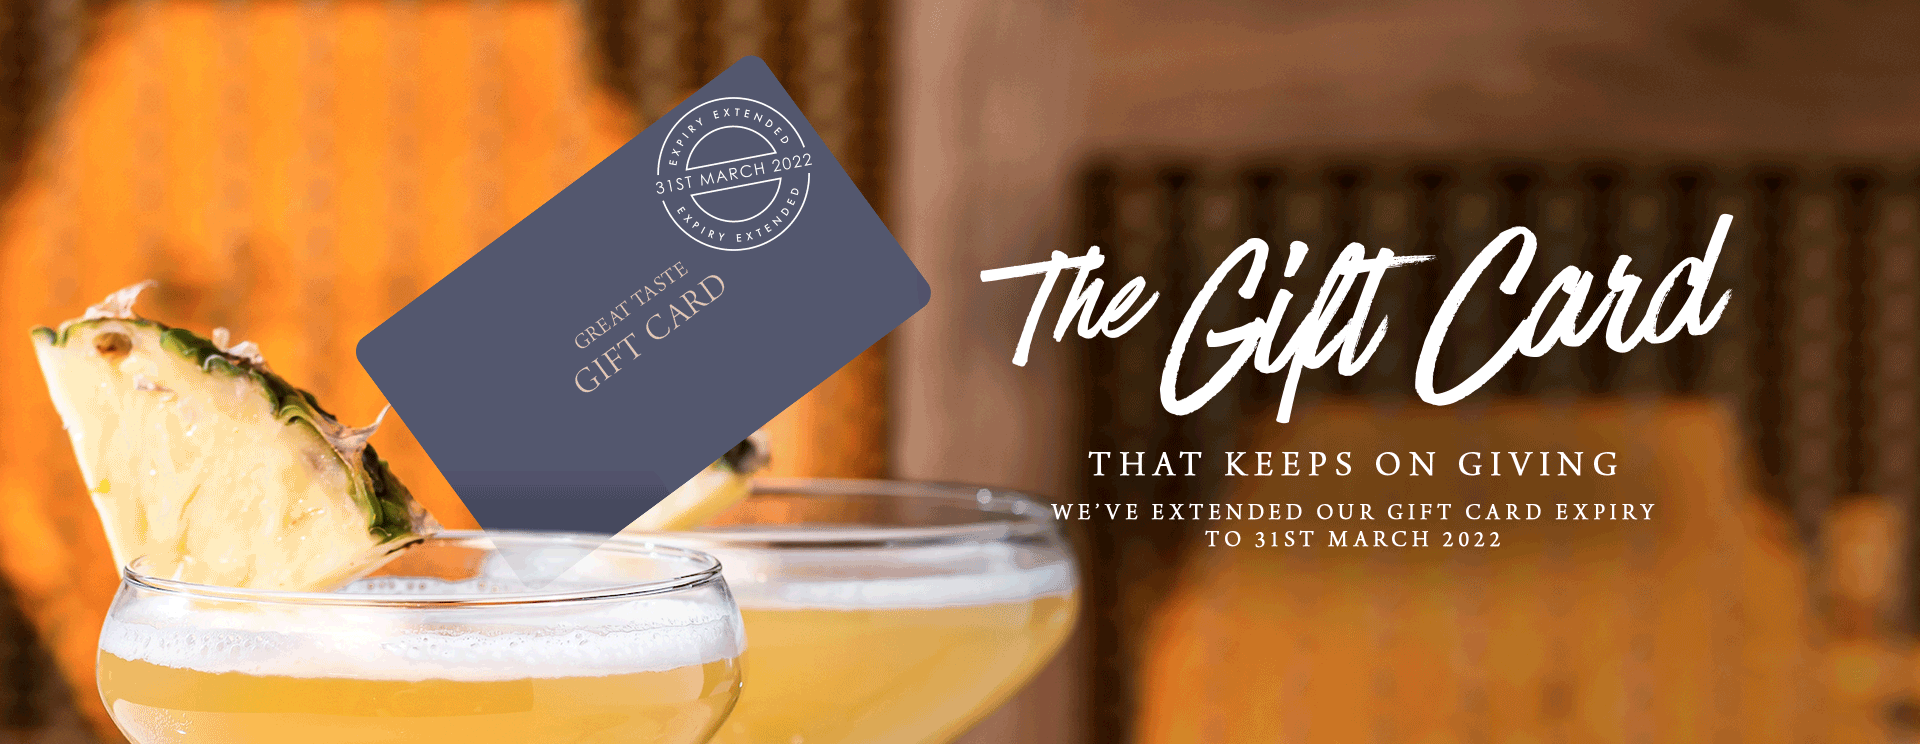 Give the gift of a gift card at The Victoria